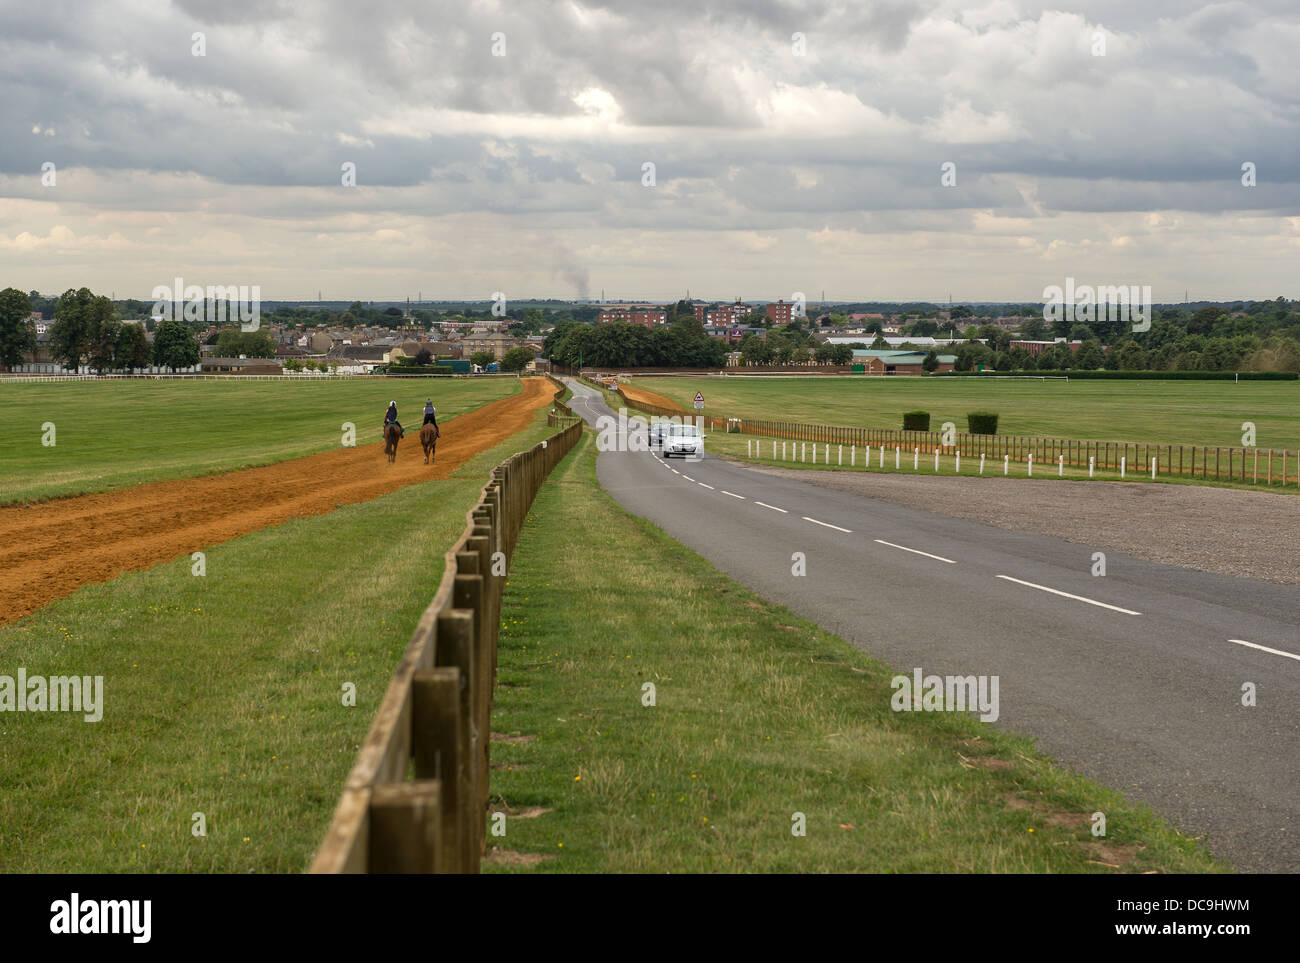 Warren Hill gallops Newmarket.  Two horses trot next to the road at the end of a session. Stock Photo